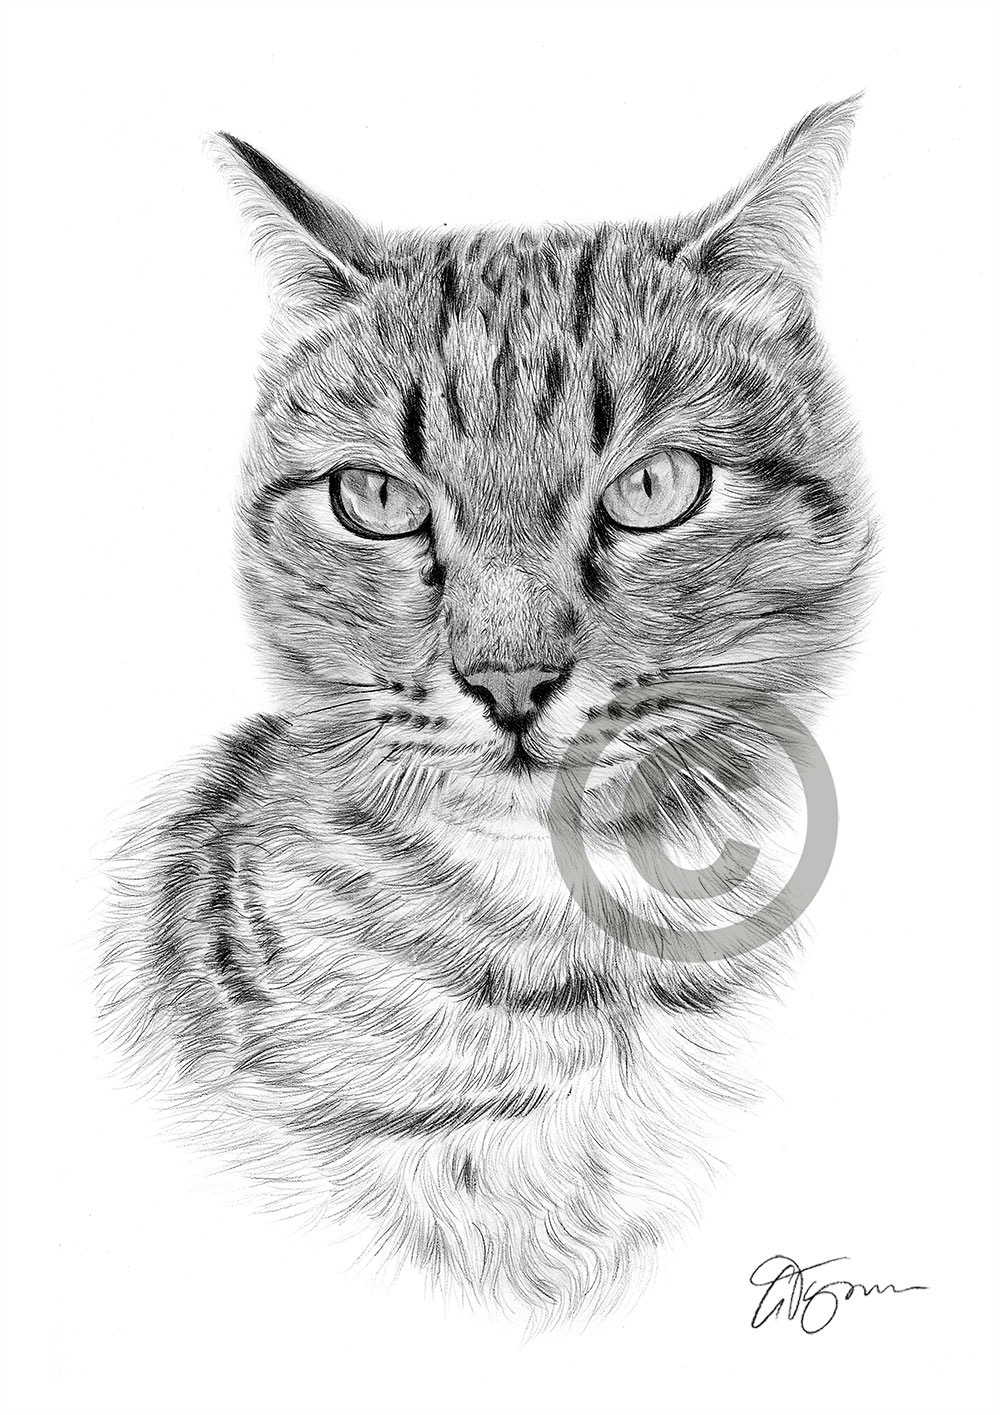 Pencil drawing of a tabby cat by artist Gary Tymon